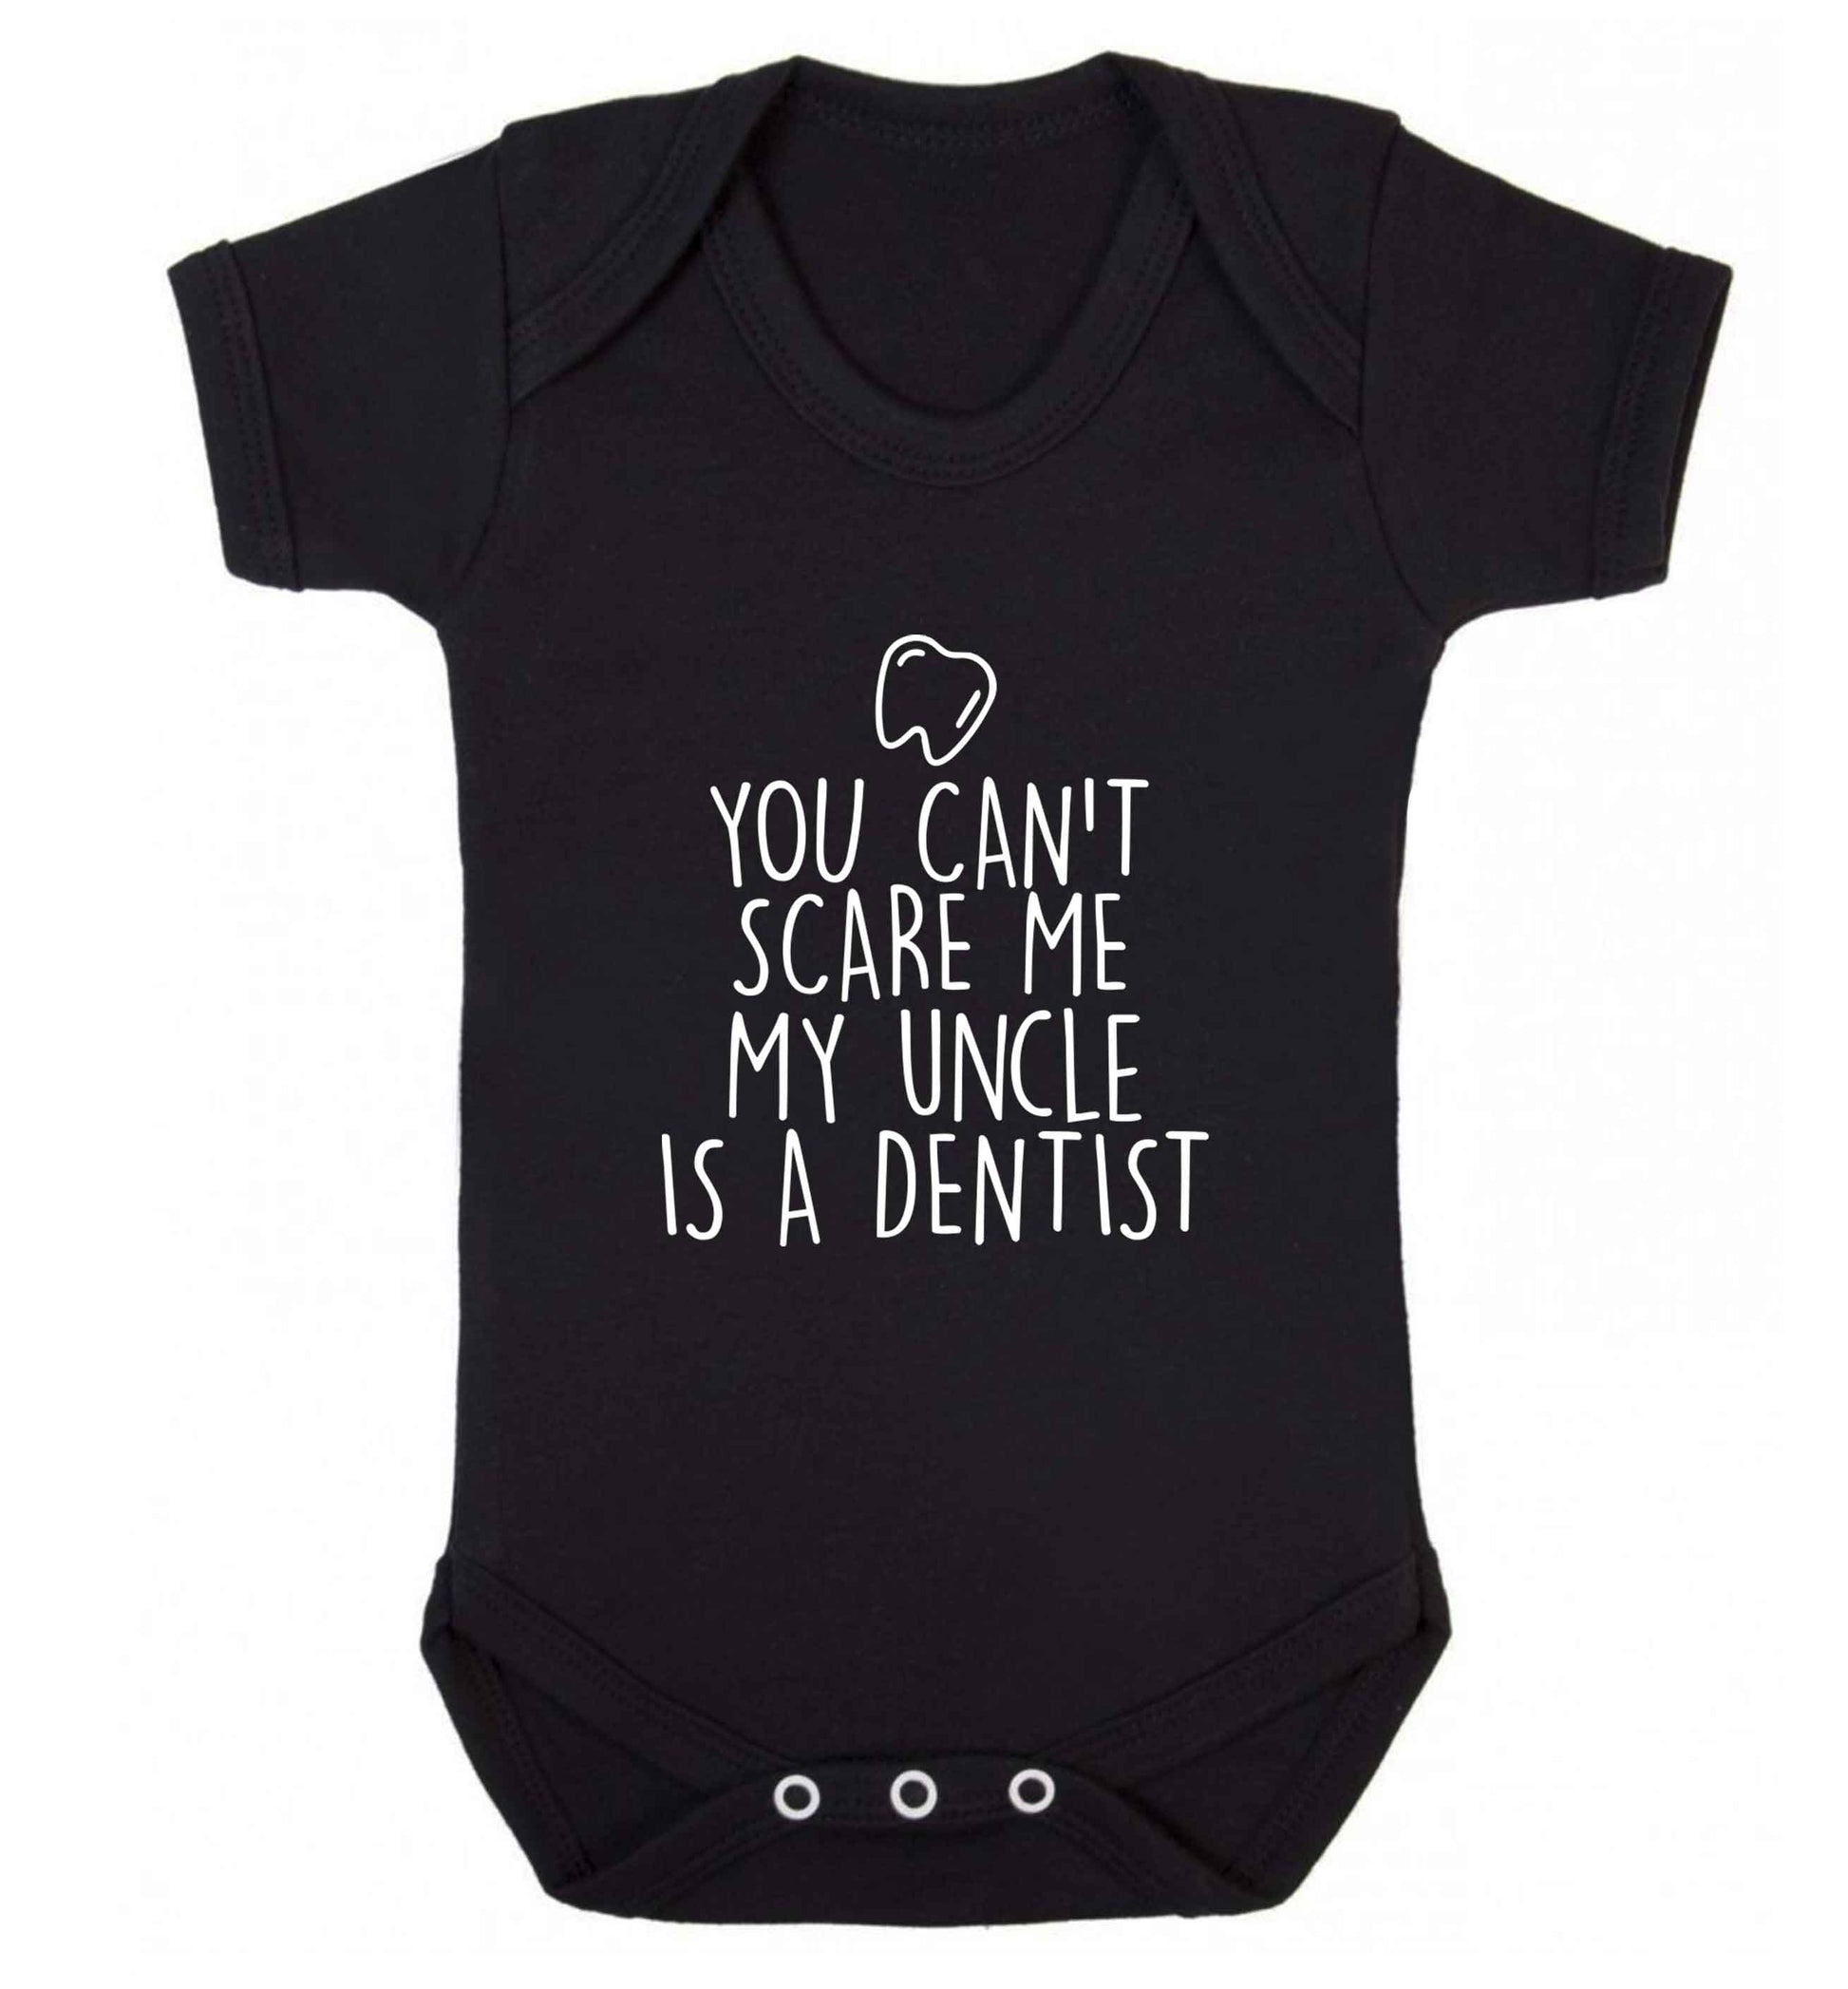 You can't scare me my uncle is a dentist baby vest black 18-24 months